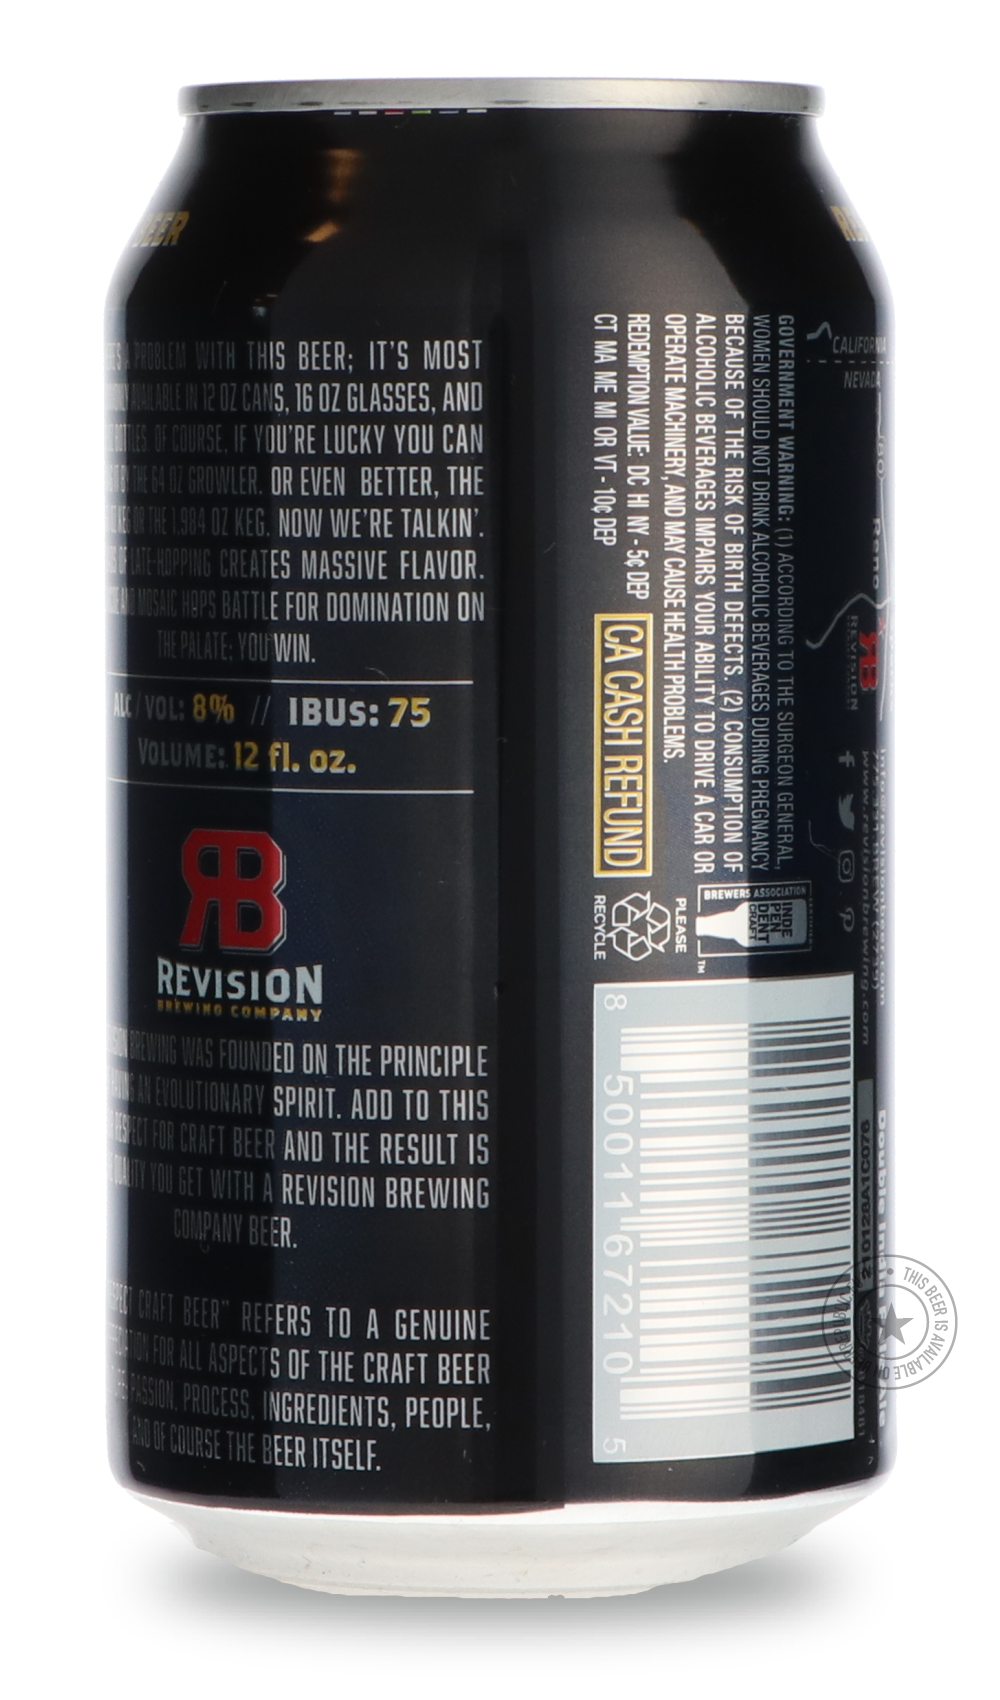 -Revision- DIPA-IPA- Only @ Beer Republic - The best online beer store for American & Canadian craft beer - Buy beer online from the USA and Canada - Bier online kopen - Amerikaans bier kopen - Craft beer store - Craft beer kopen - Amerikanisch bier kaufen - Bier online kaufen - Acheter biere online - IPA - Stout - Porter - New England IPA - Hazy IPA - Imperial Stout - Barrel Aged - Barrel Aged Imperial Stout - Brown - Dark beer - Blond - Blonde - Pilsner - Lager - Wheat - Weizen - Amber - Barley Wine - Qua